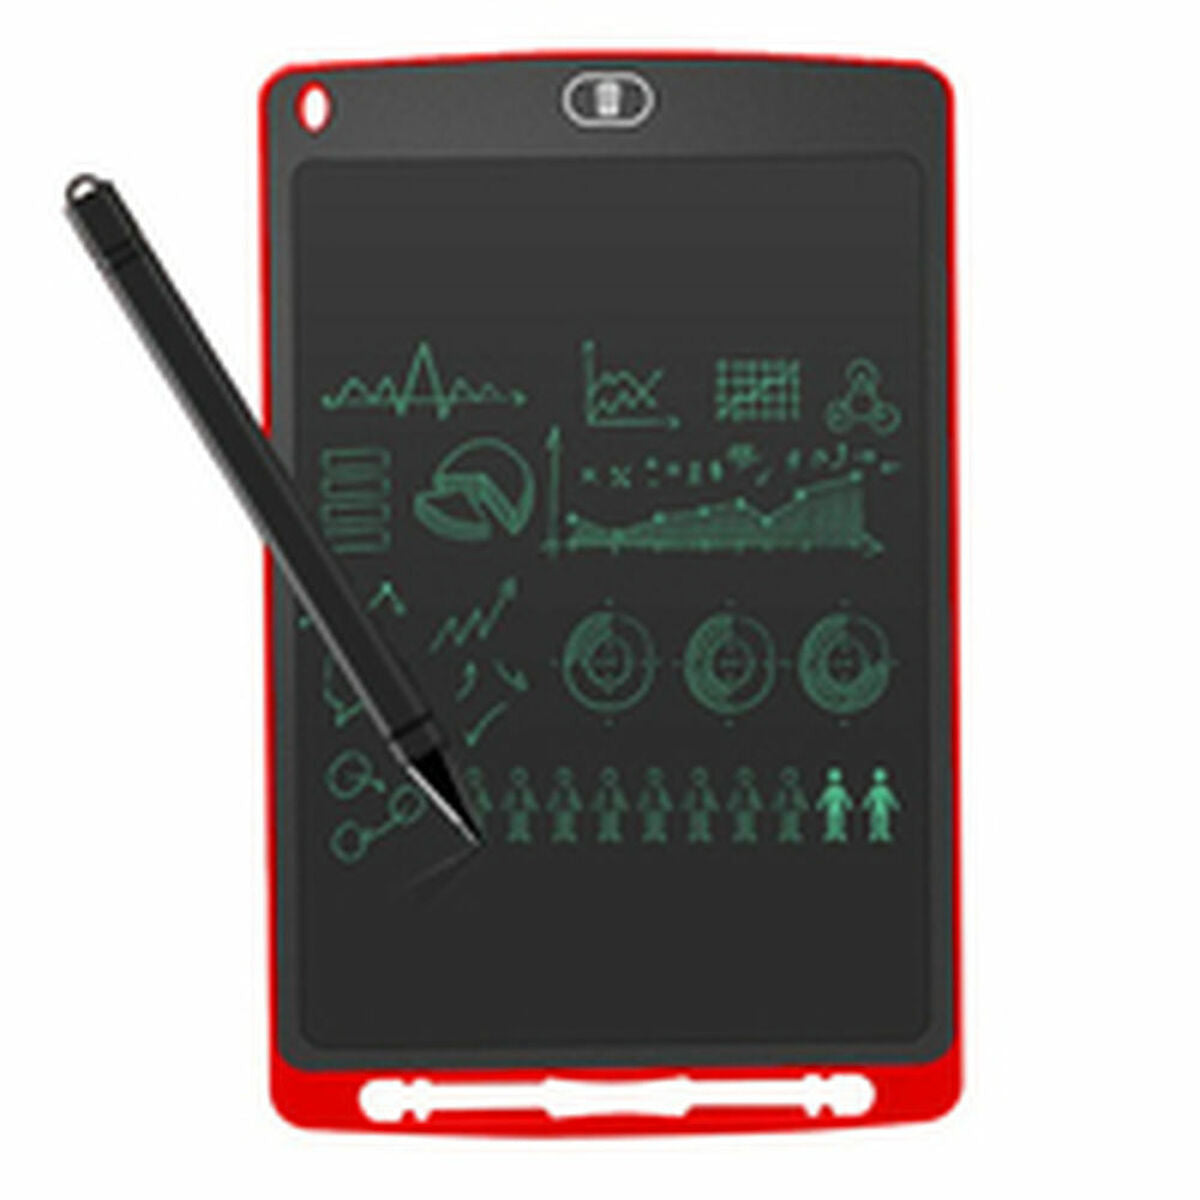 Interactive Whiteboard LEOTEC SKETCHBOARD  Red 10" LCD Screen, LEOTEC, Computing, Accessories, interactive-whiteboard-leotec-sketchboard-red-10-lcd-screen, Brand_LEOTEC, category-reference-2609, category-reference-2803, category-reference-2812, category-reference-t-19685, category-reference-t-19908, category-reference-t-21353, computers / components, Condition_NEW, Price_20 - 50, Teleworking, RiotNook